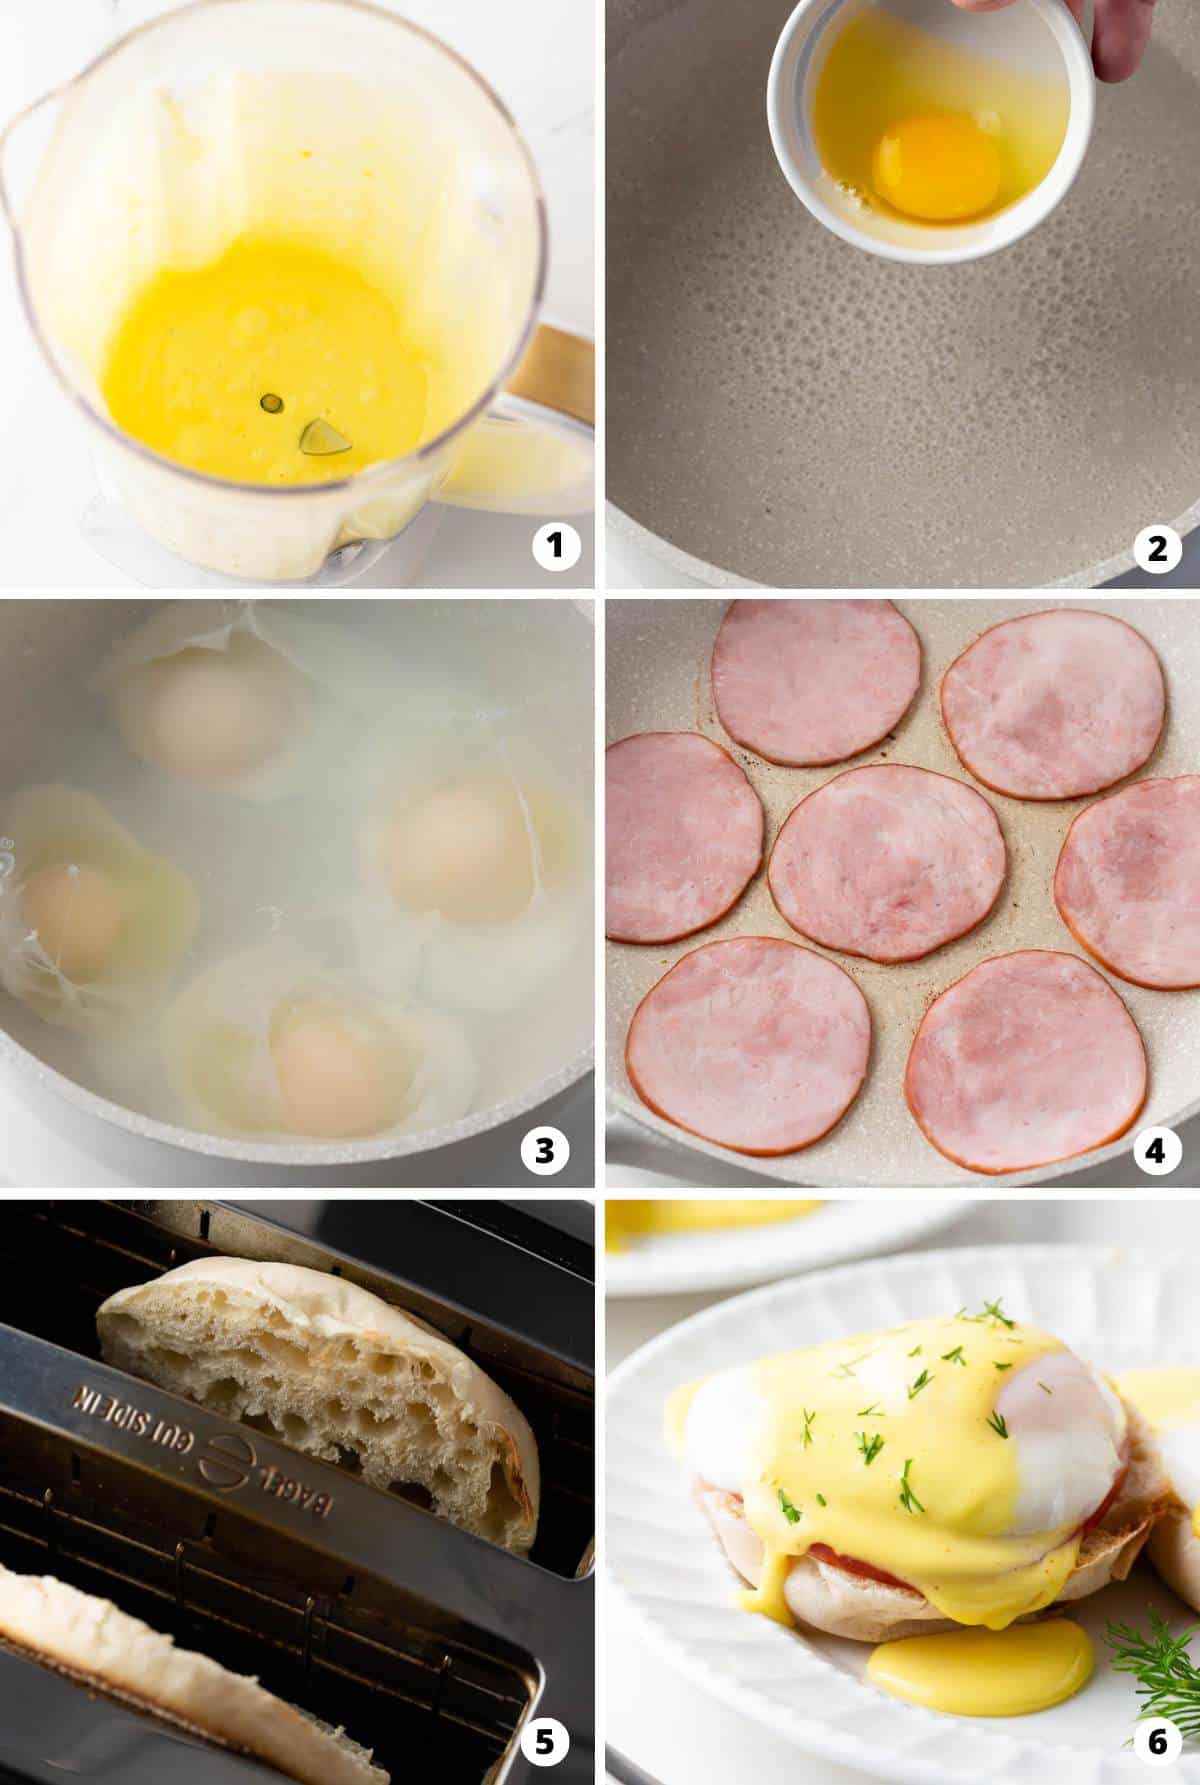 Showing how to make eggs Benedict in a 6 step collage. 